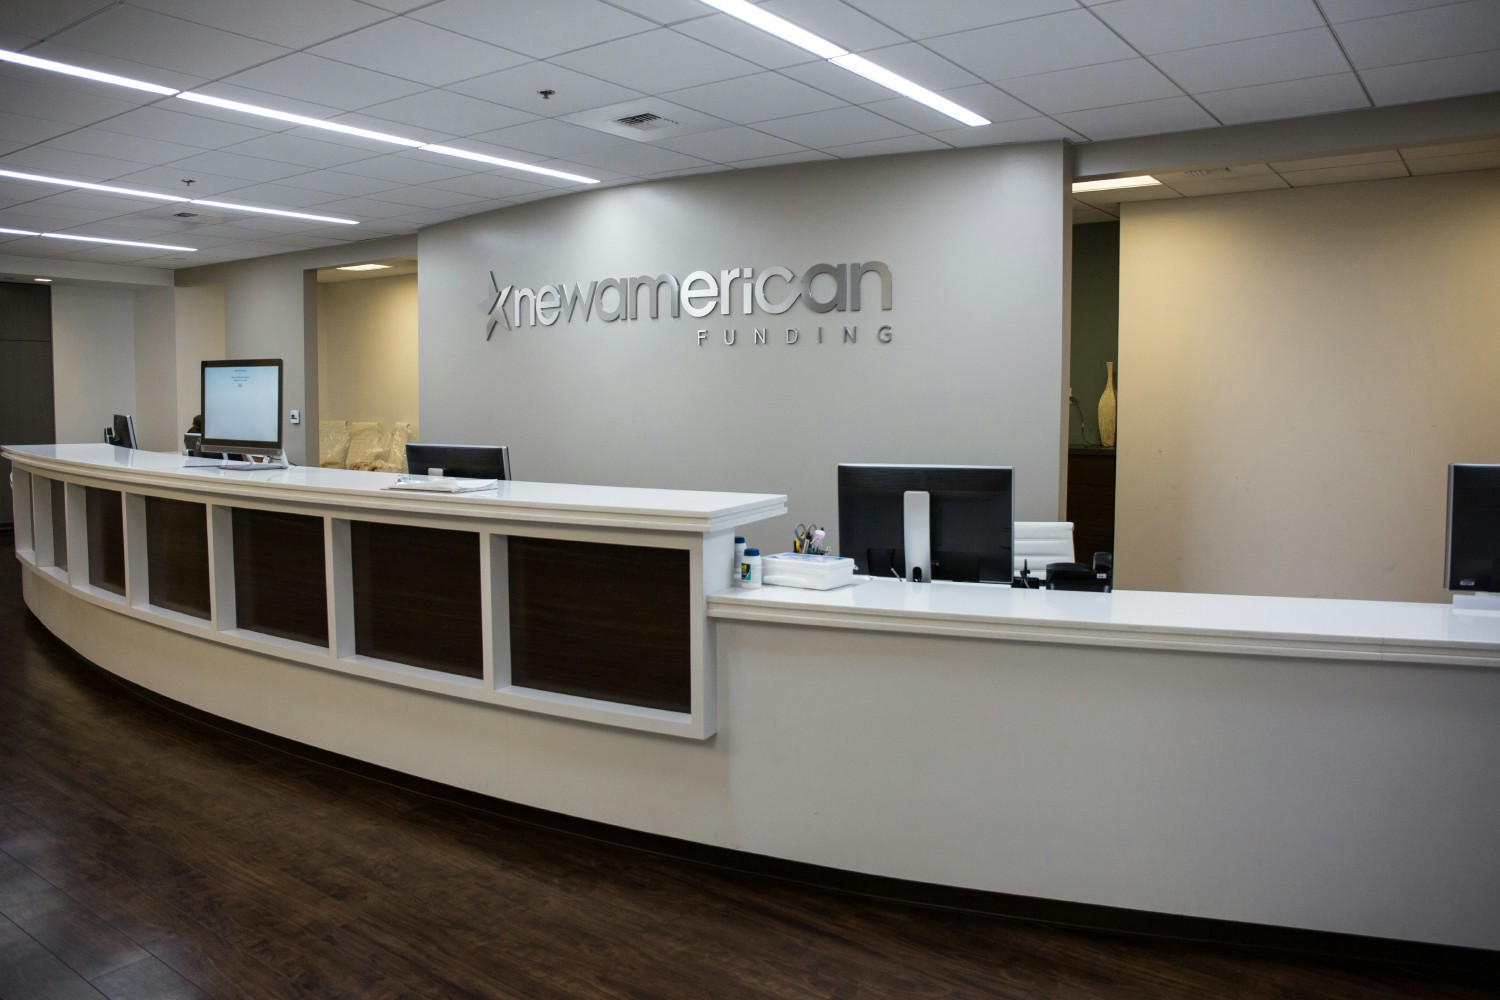 Inside New American Funding’s corporate office in Tustin, CA